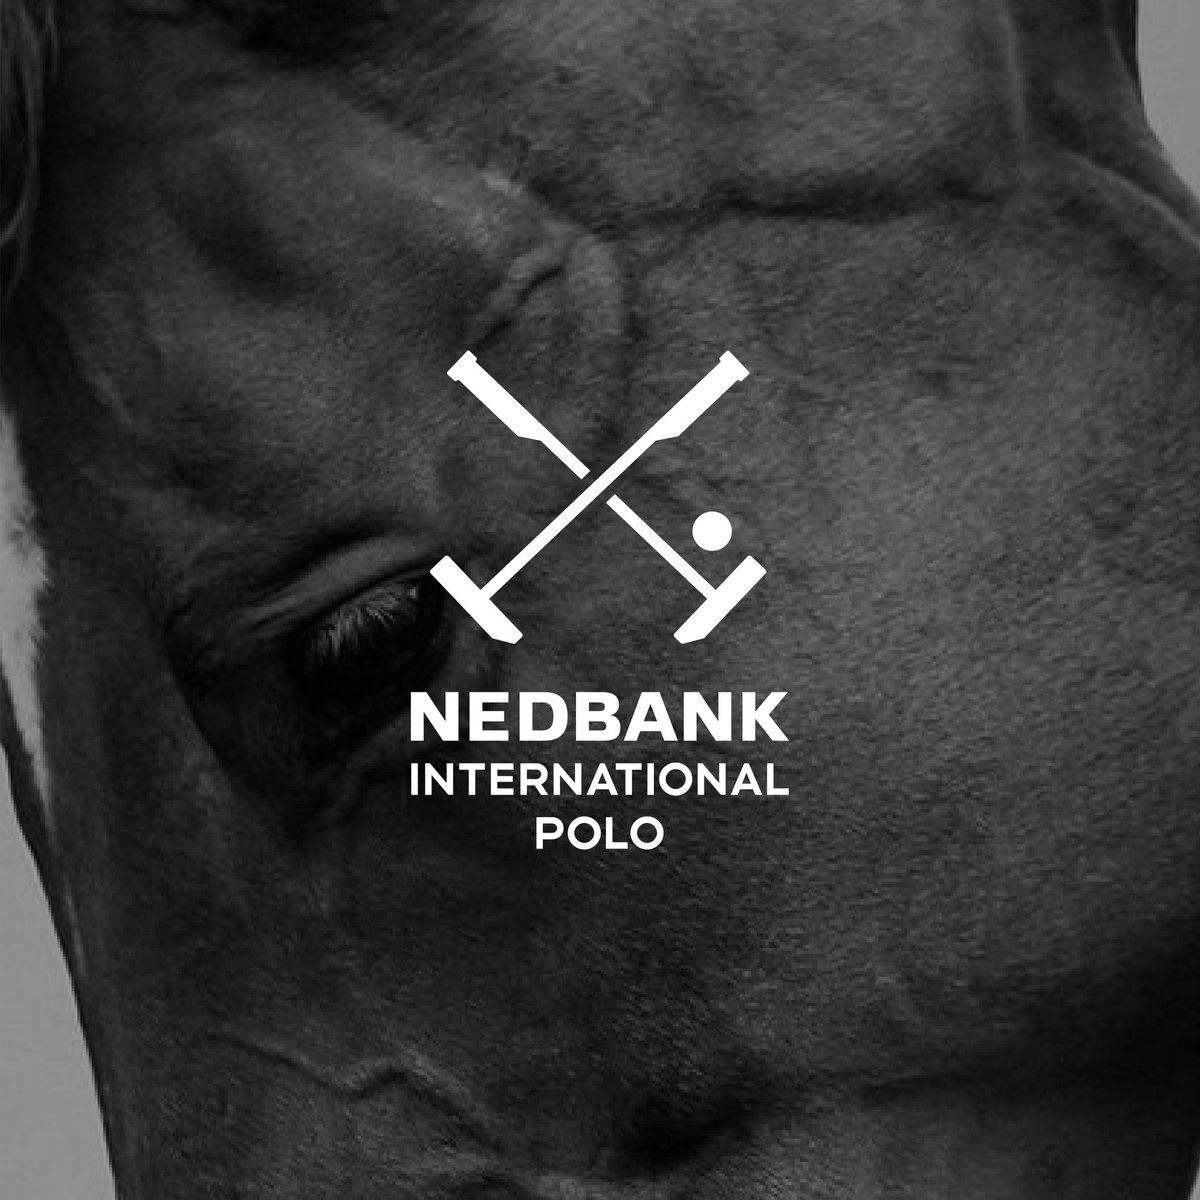 22 April 2023. @InandaClub - the home of South African Polo🏇🏿 @Nedbank @WantedOnlineSA @StellaArtoisZA @AstonMartinSA @safricanpolo #nedbankpolo #polo #inanda #internationalpolo #nedbankinternationalpolo #nedbank #NewNobility